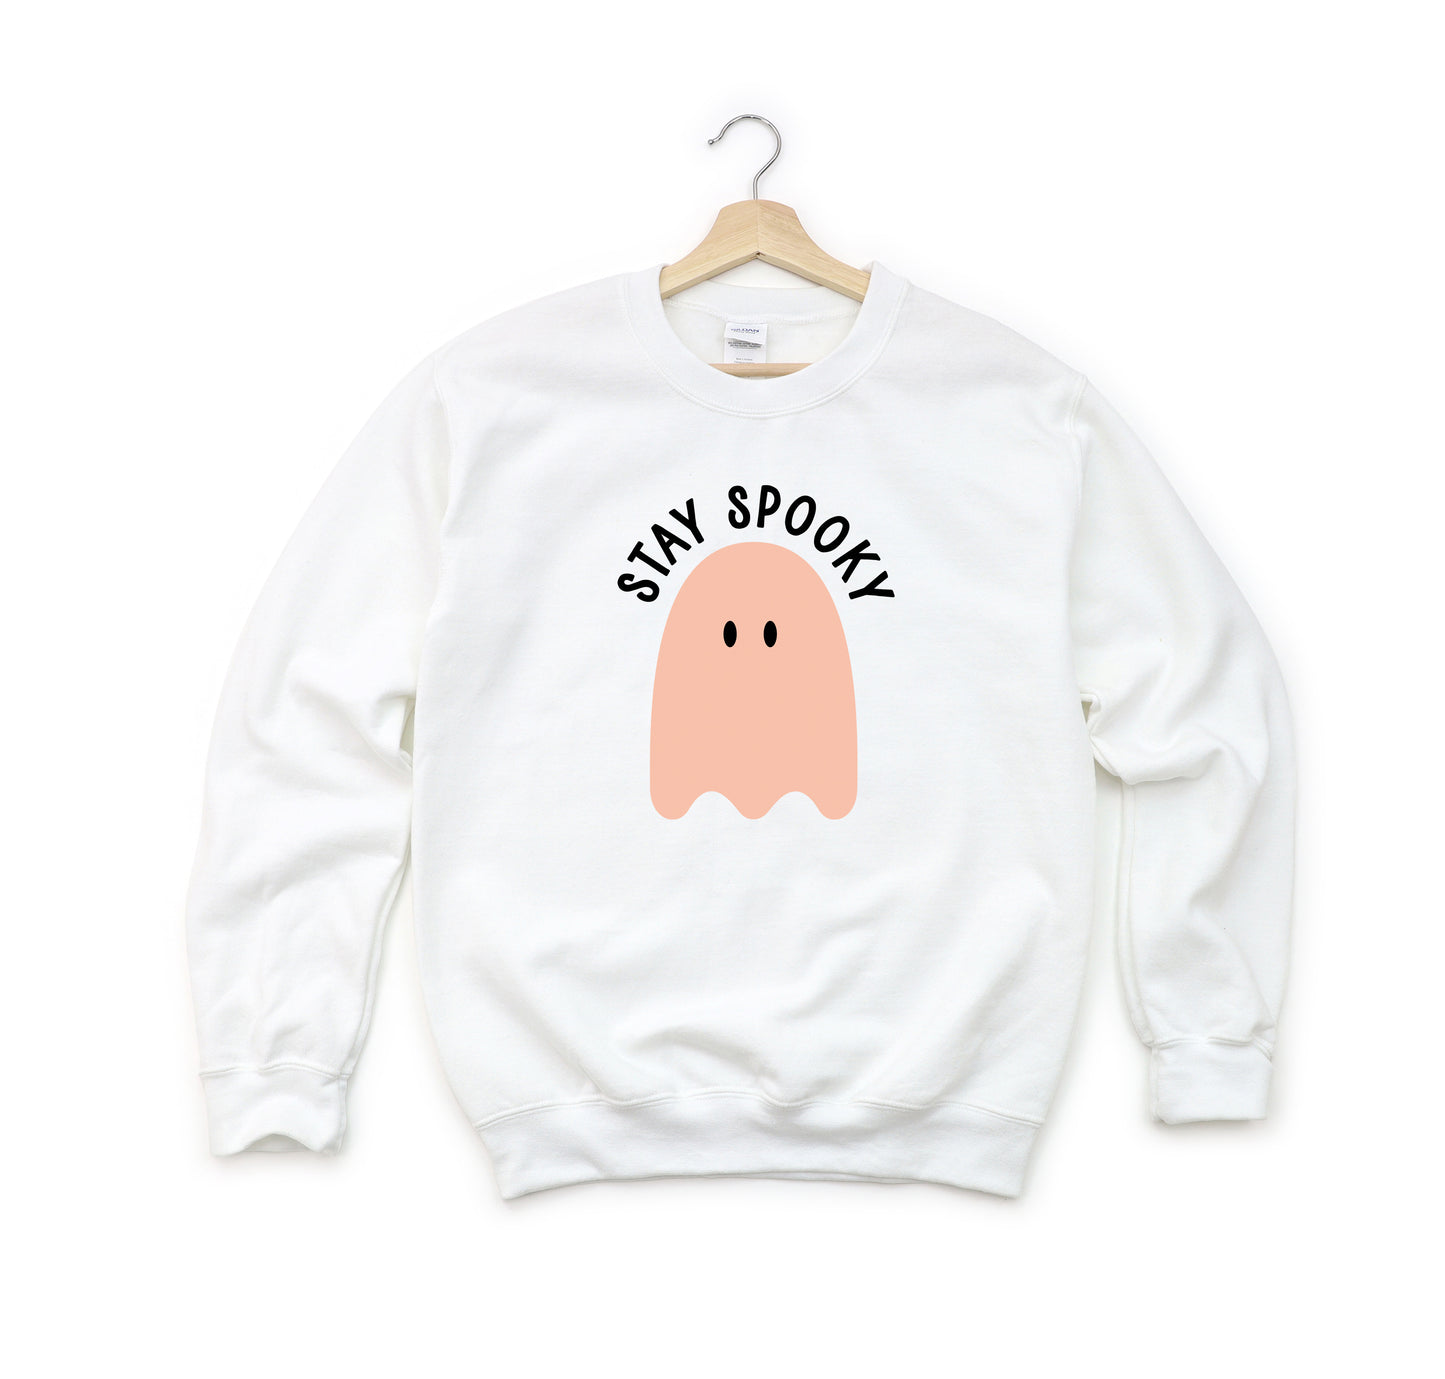 Stay Spooky Ghost | Youth Graphic Sweatshirt